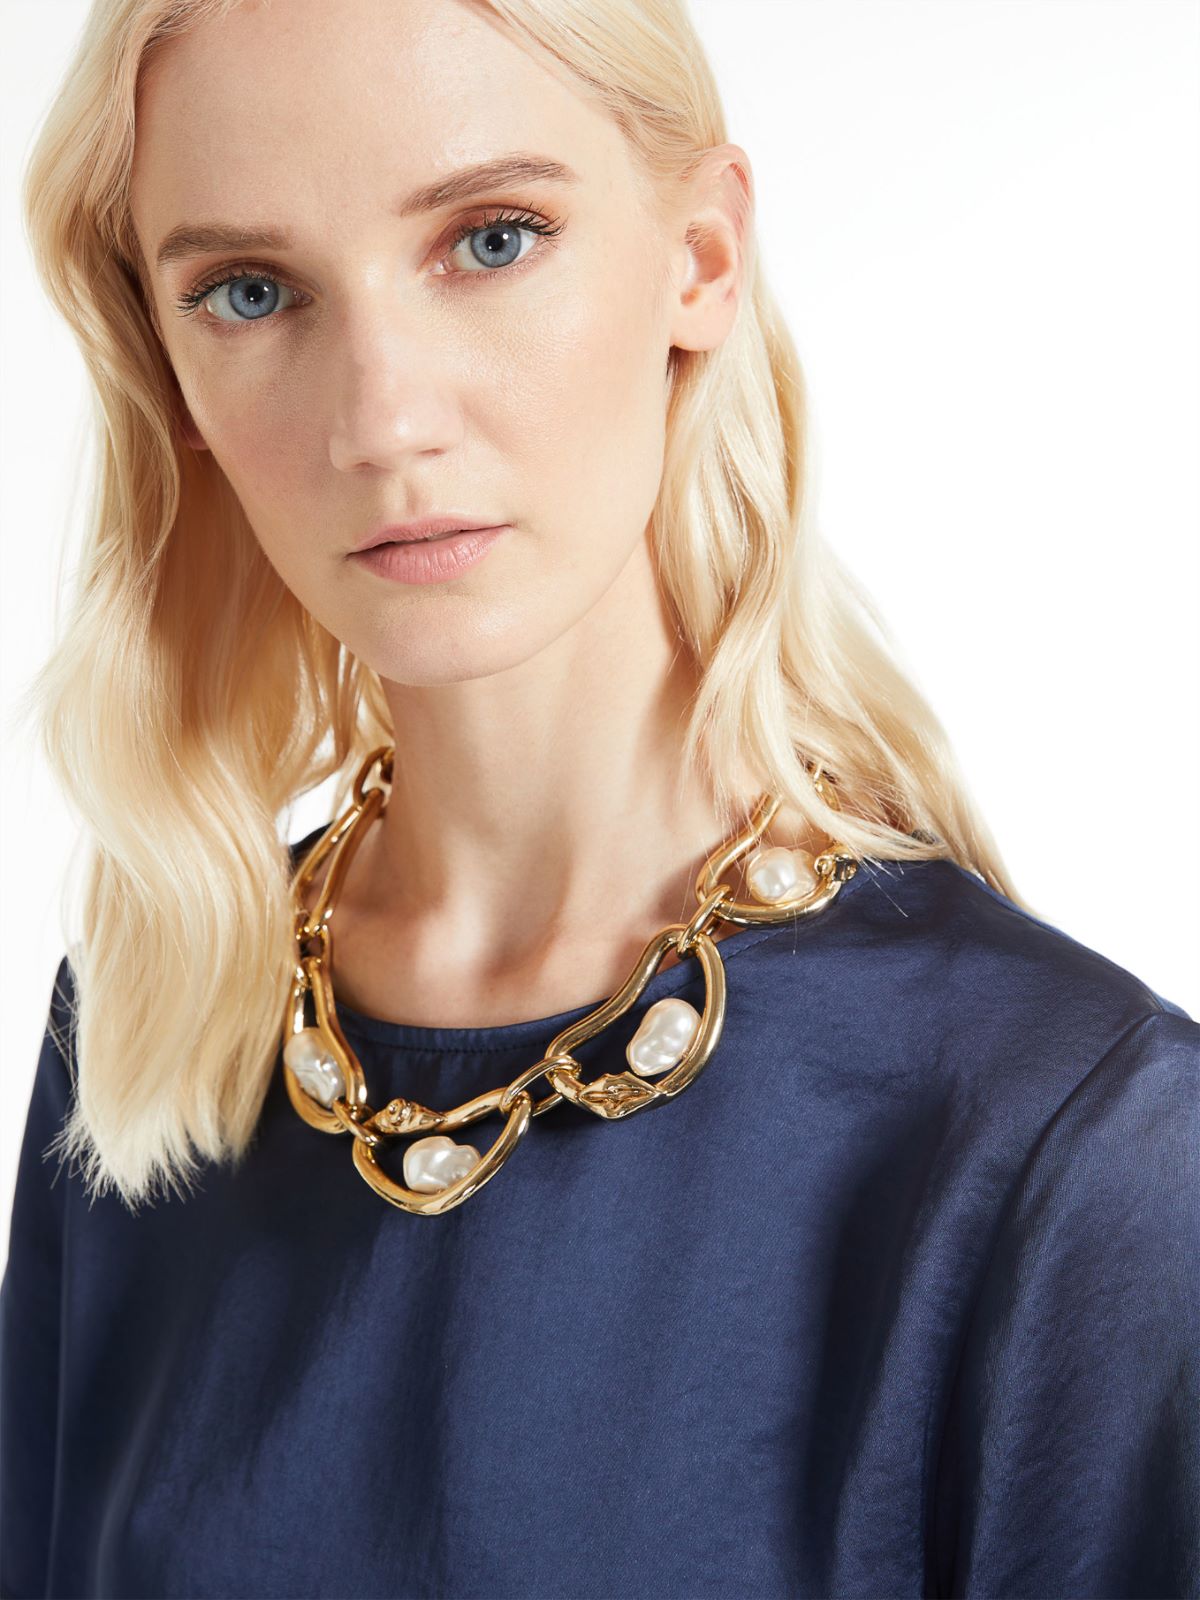 Metal and pearl necklace - GOLD - Weekend Max Mara - 3